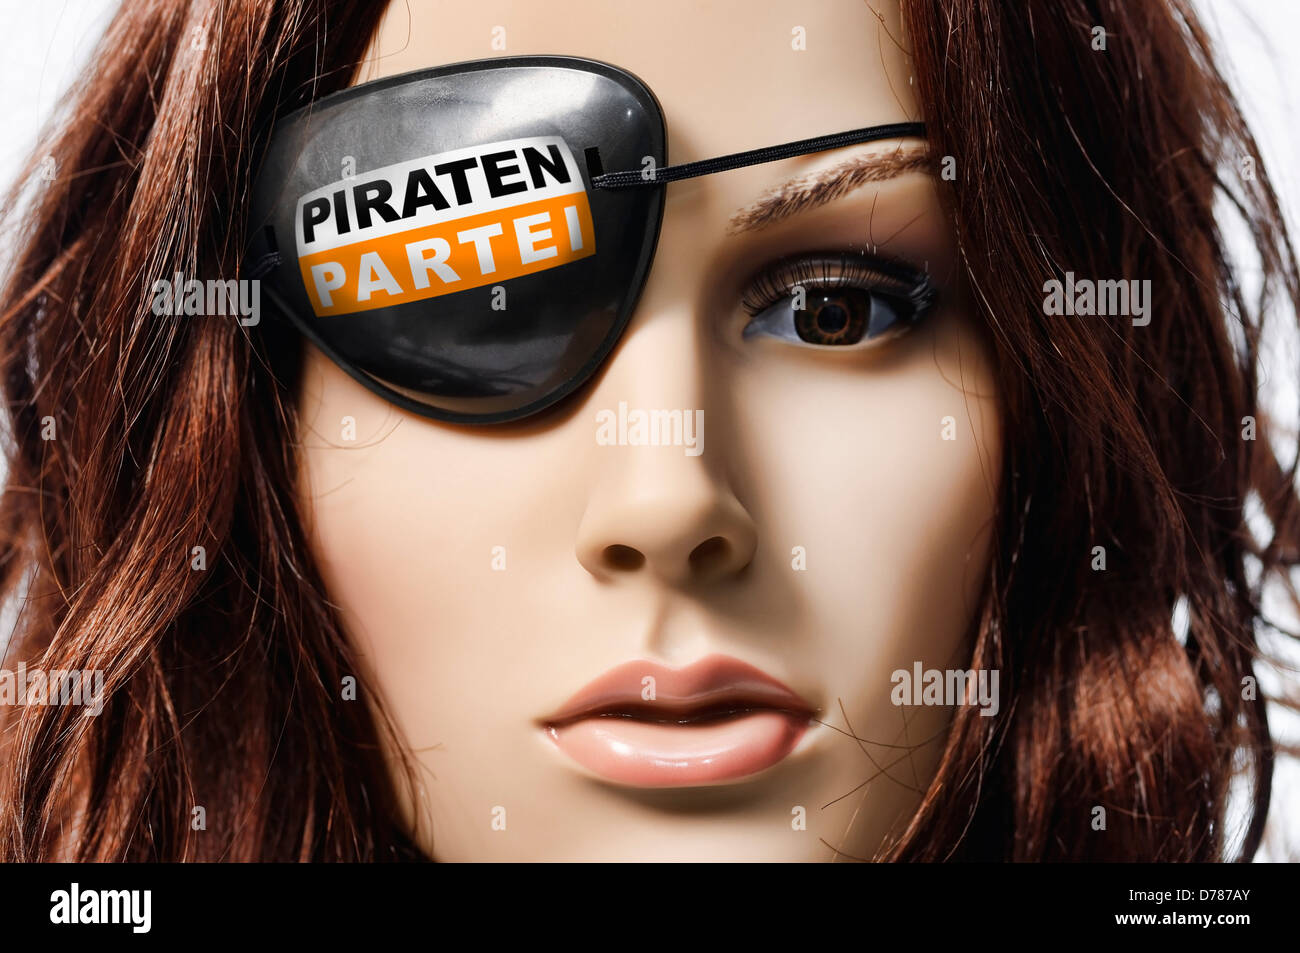 Doll with pirate's eye patch, symbolic photo pirate's party Stock Photo